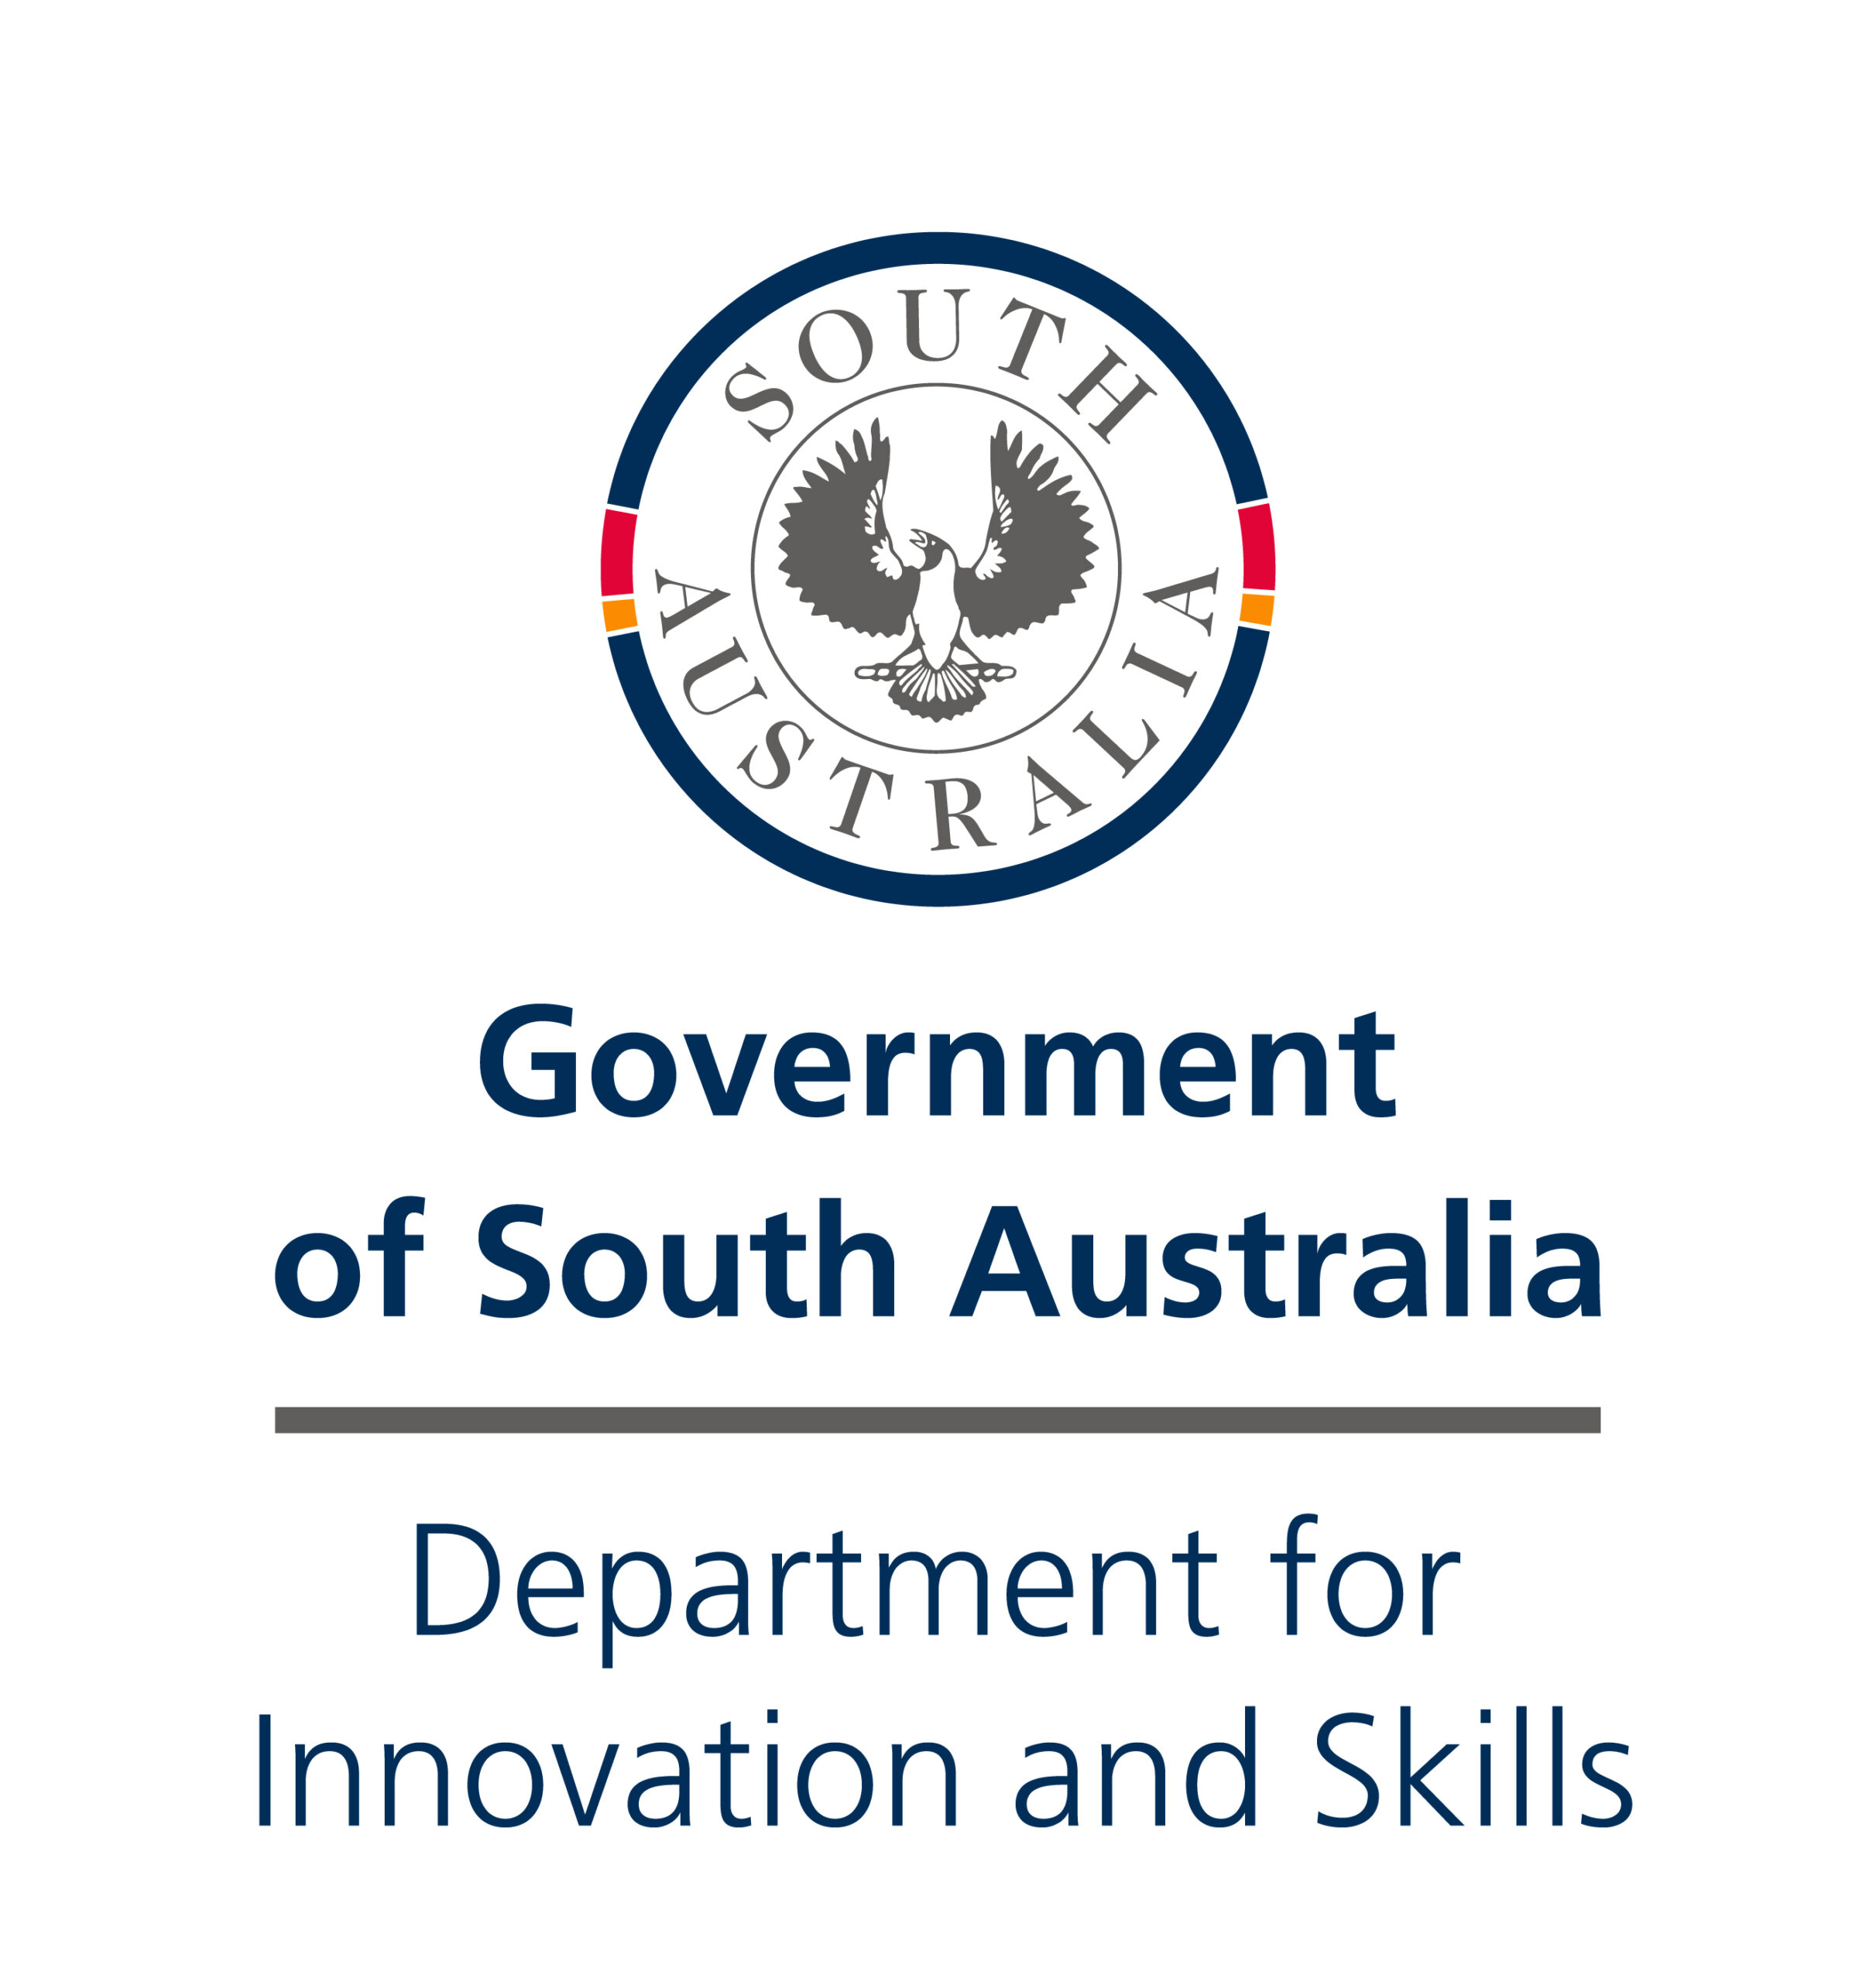 Government of South Australia Department for Innovation and Skills